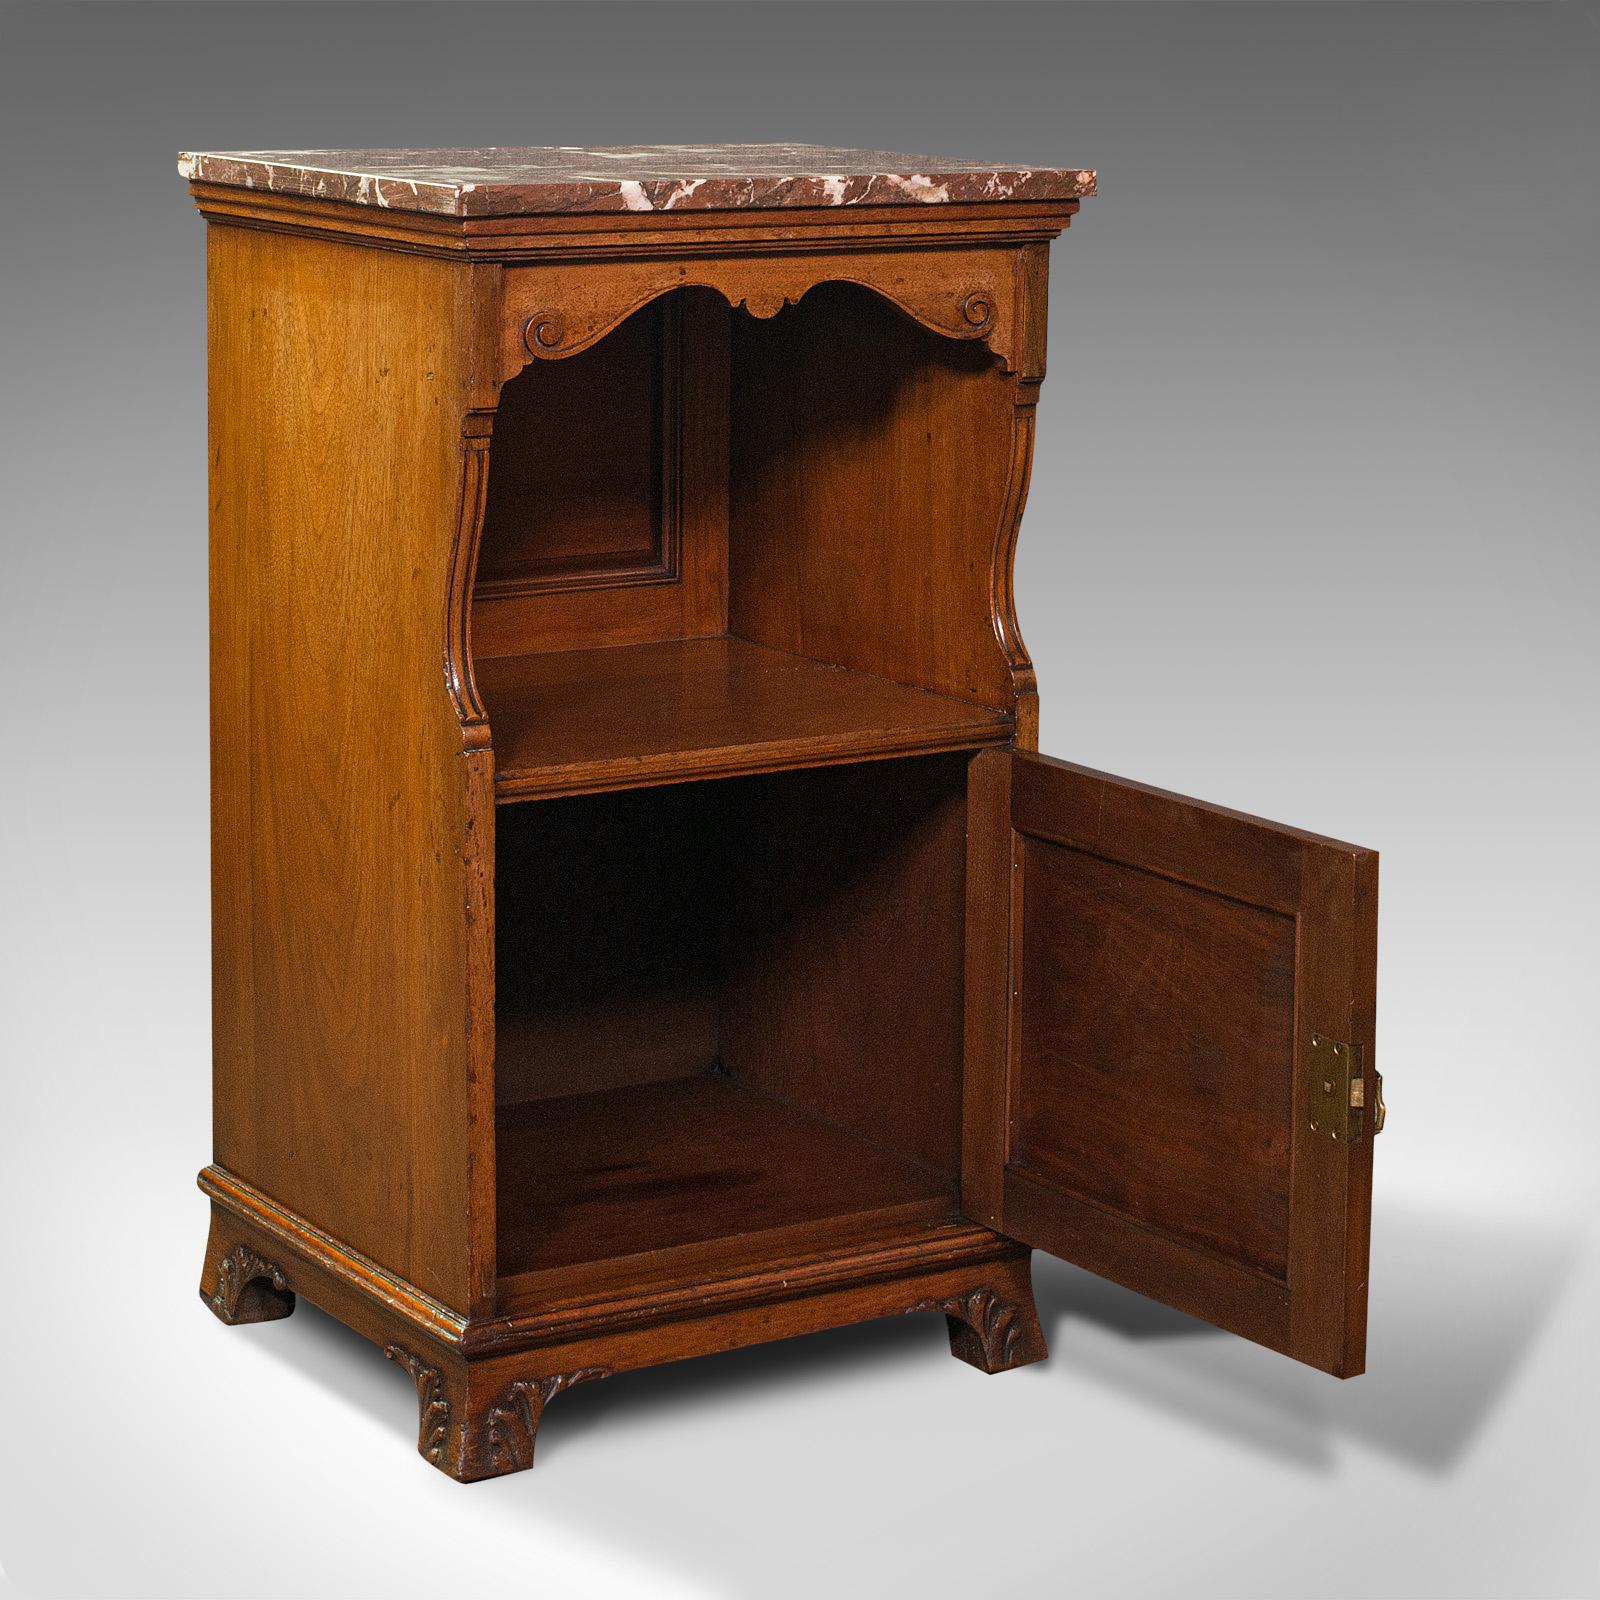 This is an antique nightstand. An English, walnut and marble, pot cupboard or bedside cabinet by Gillow & Co of Lancaster, dating to the Victorian period, circa 1890.

Tastefully appointed and of appealing proportion
Displays a desirable aged